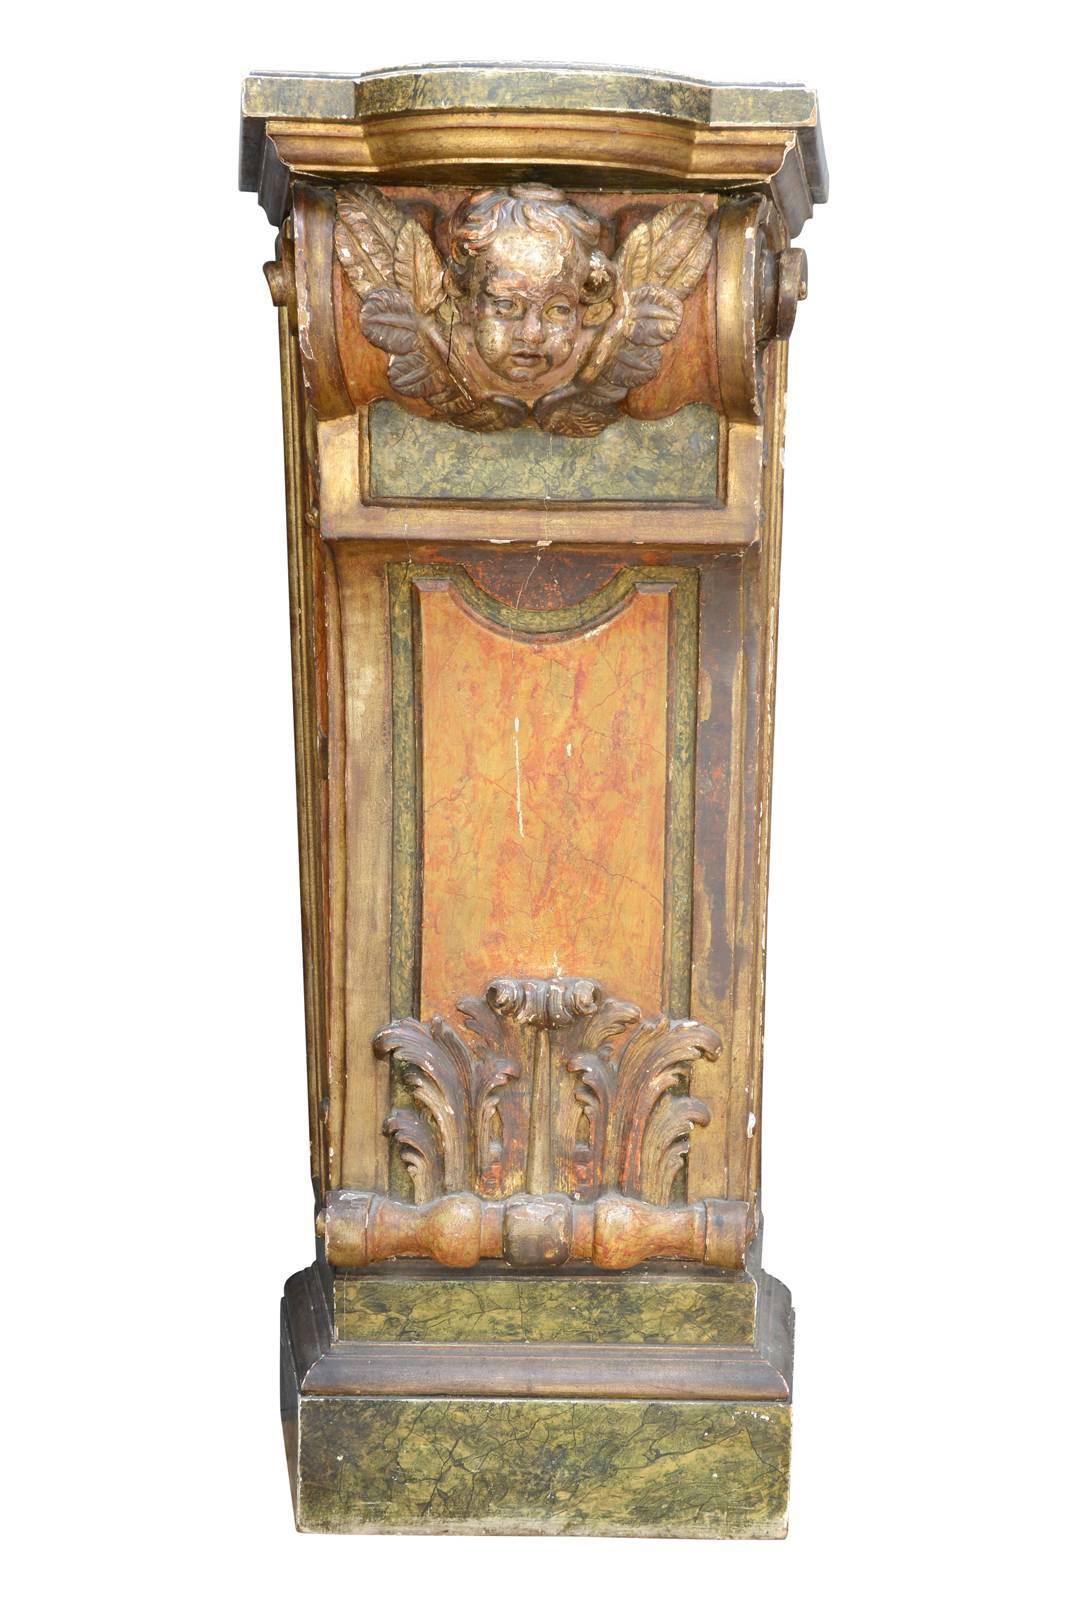 Pair of carved wood and painted consoles, Italian work dating from the early of 20th century. A cherub head located on a winding decor and an upright acanthus leaf adorn the front of the console. They are painted with yellow, green and golden. The